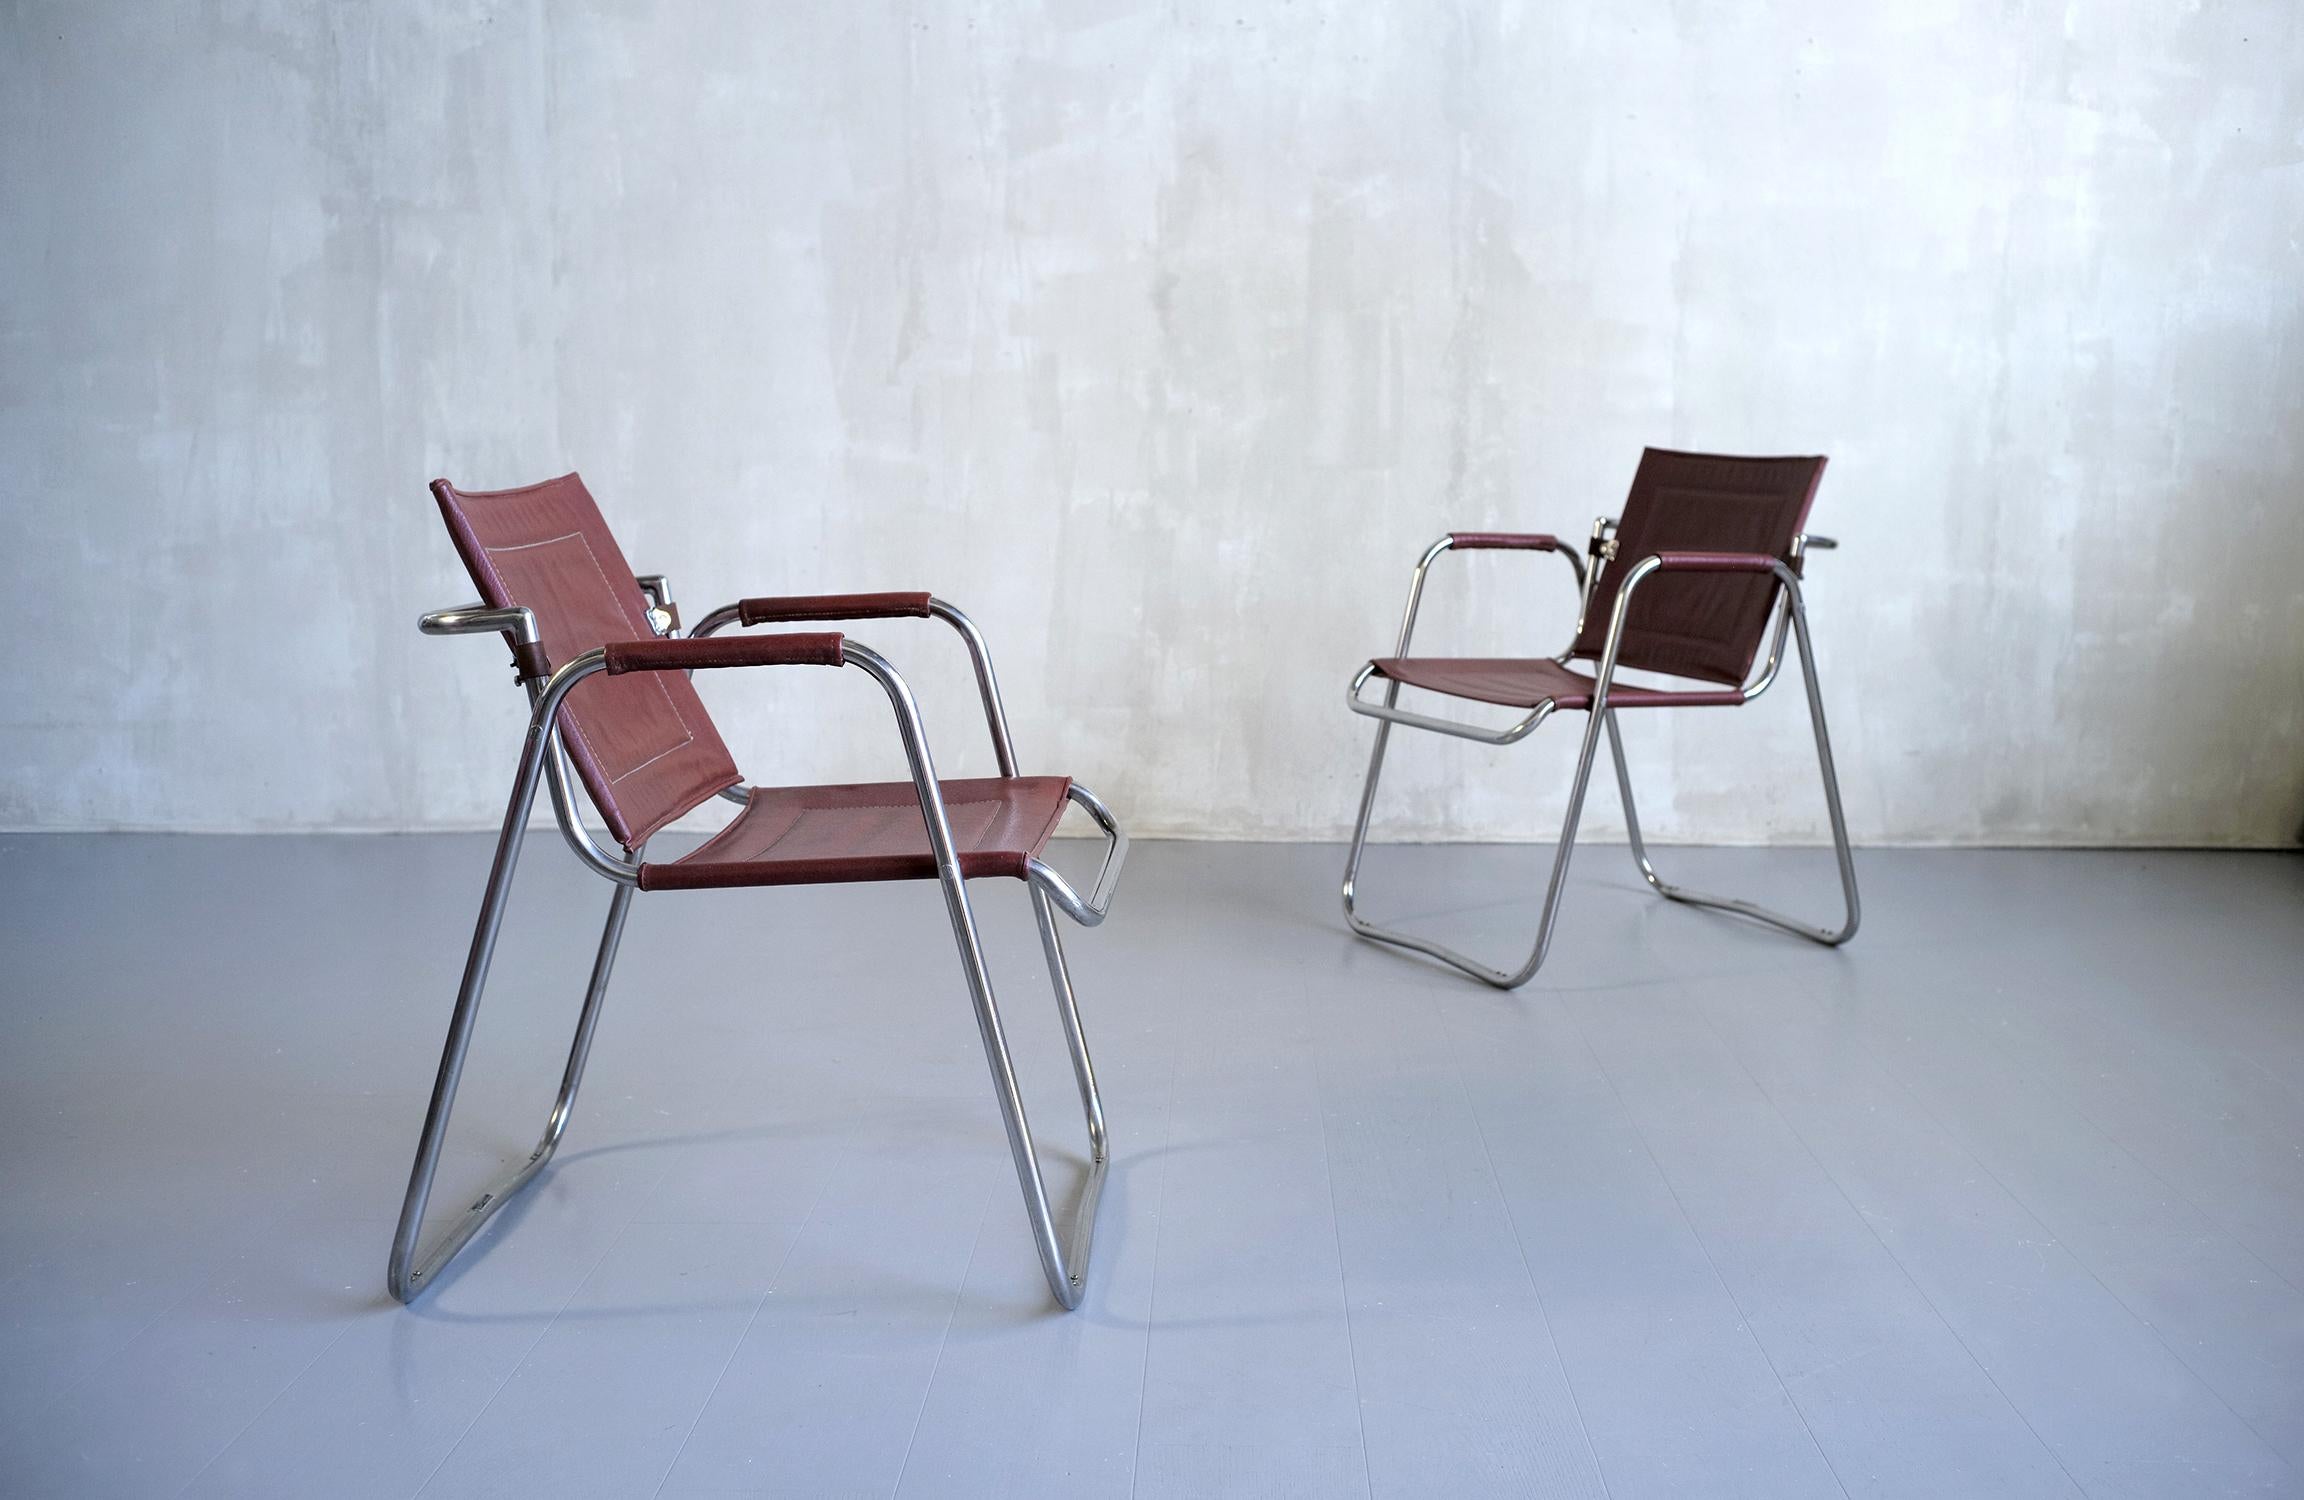 Pair of nickel-plated tubular metal armchairs created by Jacques Hitier, produced by Tubauto during the 1950s. The seat, armrests and backrest are upholstered in their original burgundy imitation leather. The backrest is swivel, fitted with leather